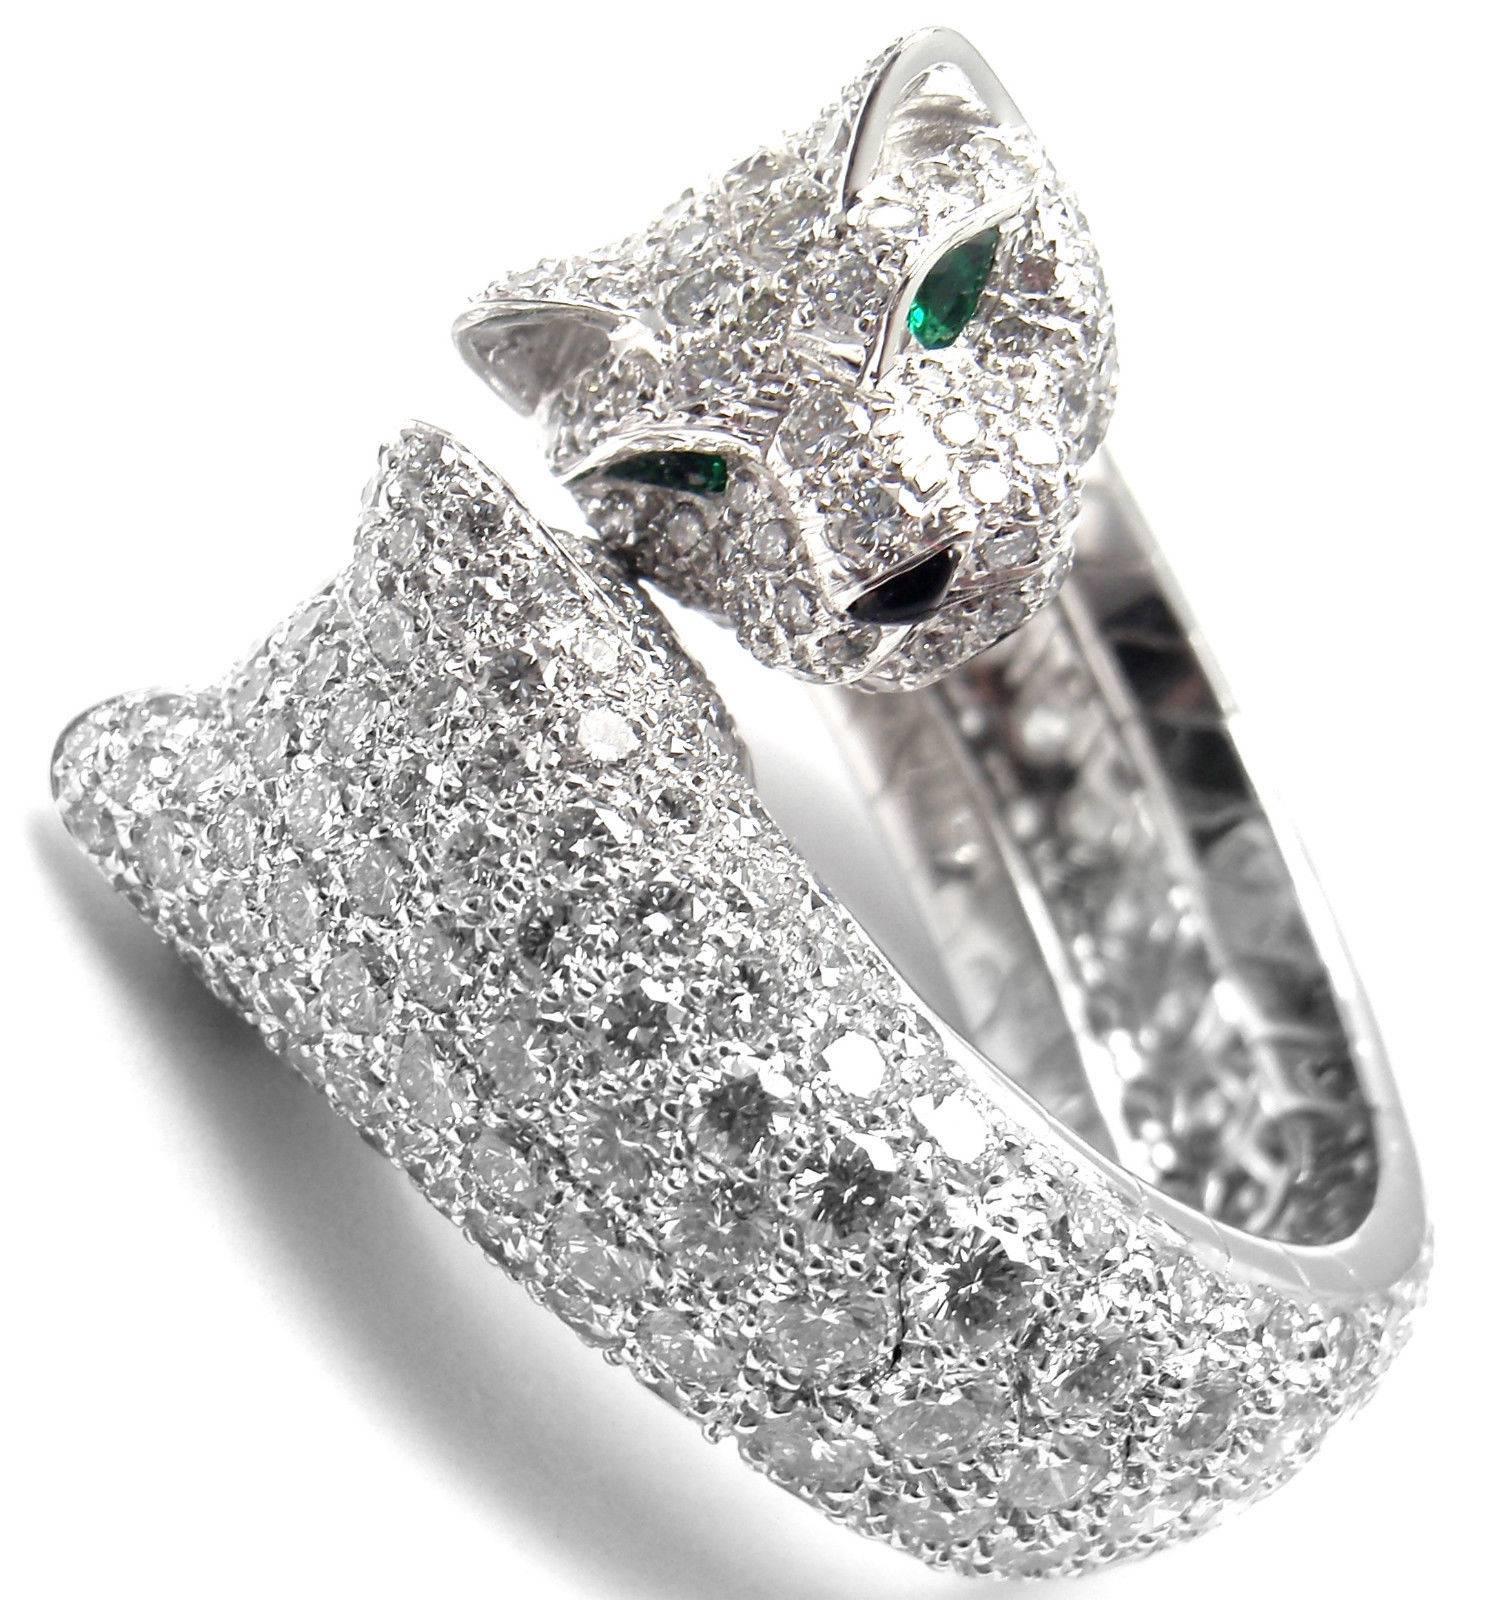 18k White Gold Double Panther Diamond Ring by Cartier. 
Rare piece, part of Cartier's 